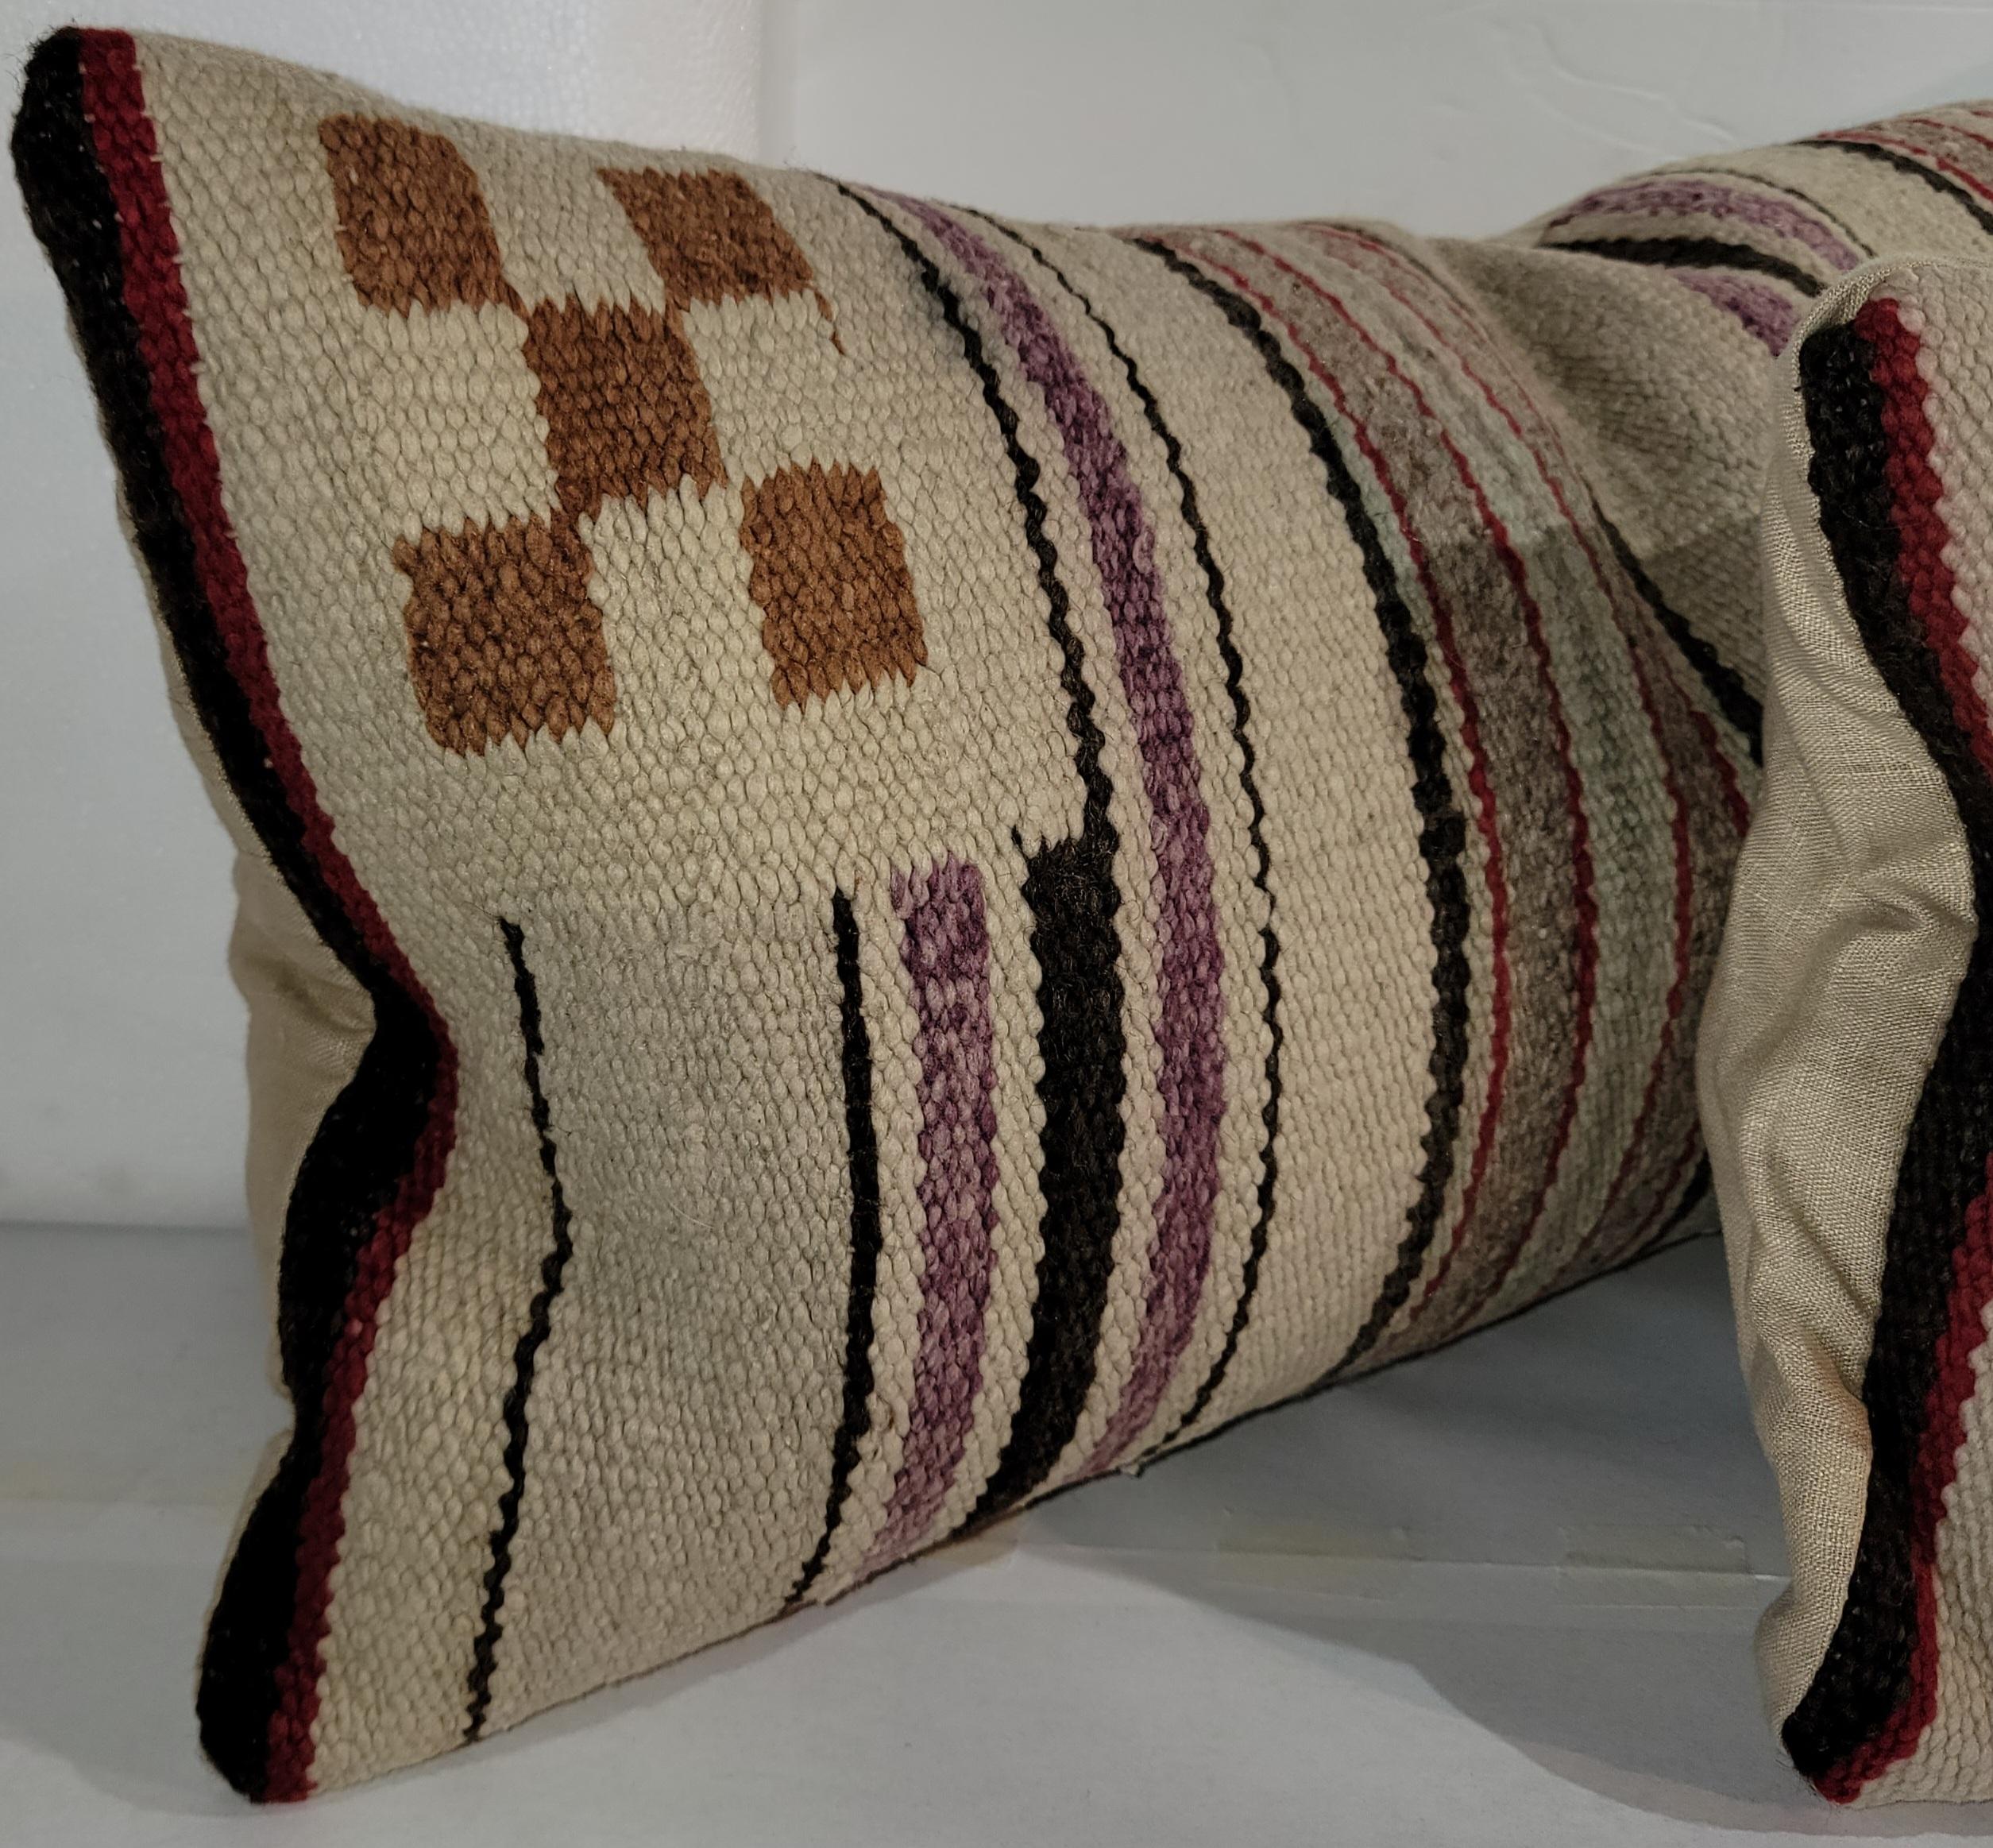 Early 20thc Navajo Indian weaving saddle blanket bolster pillows. The backings are in a cotton linen and the inserts are down & feather fill.Sold as a pair.